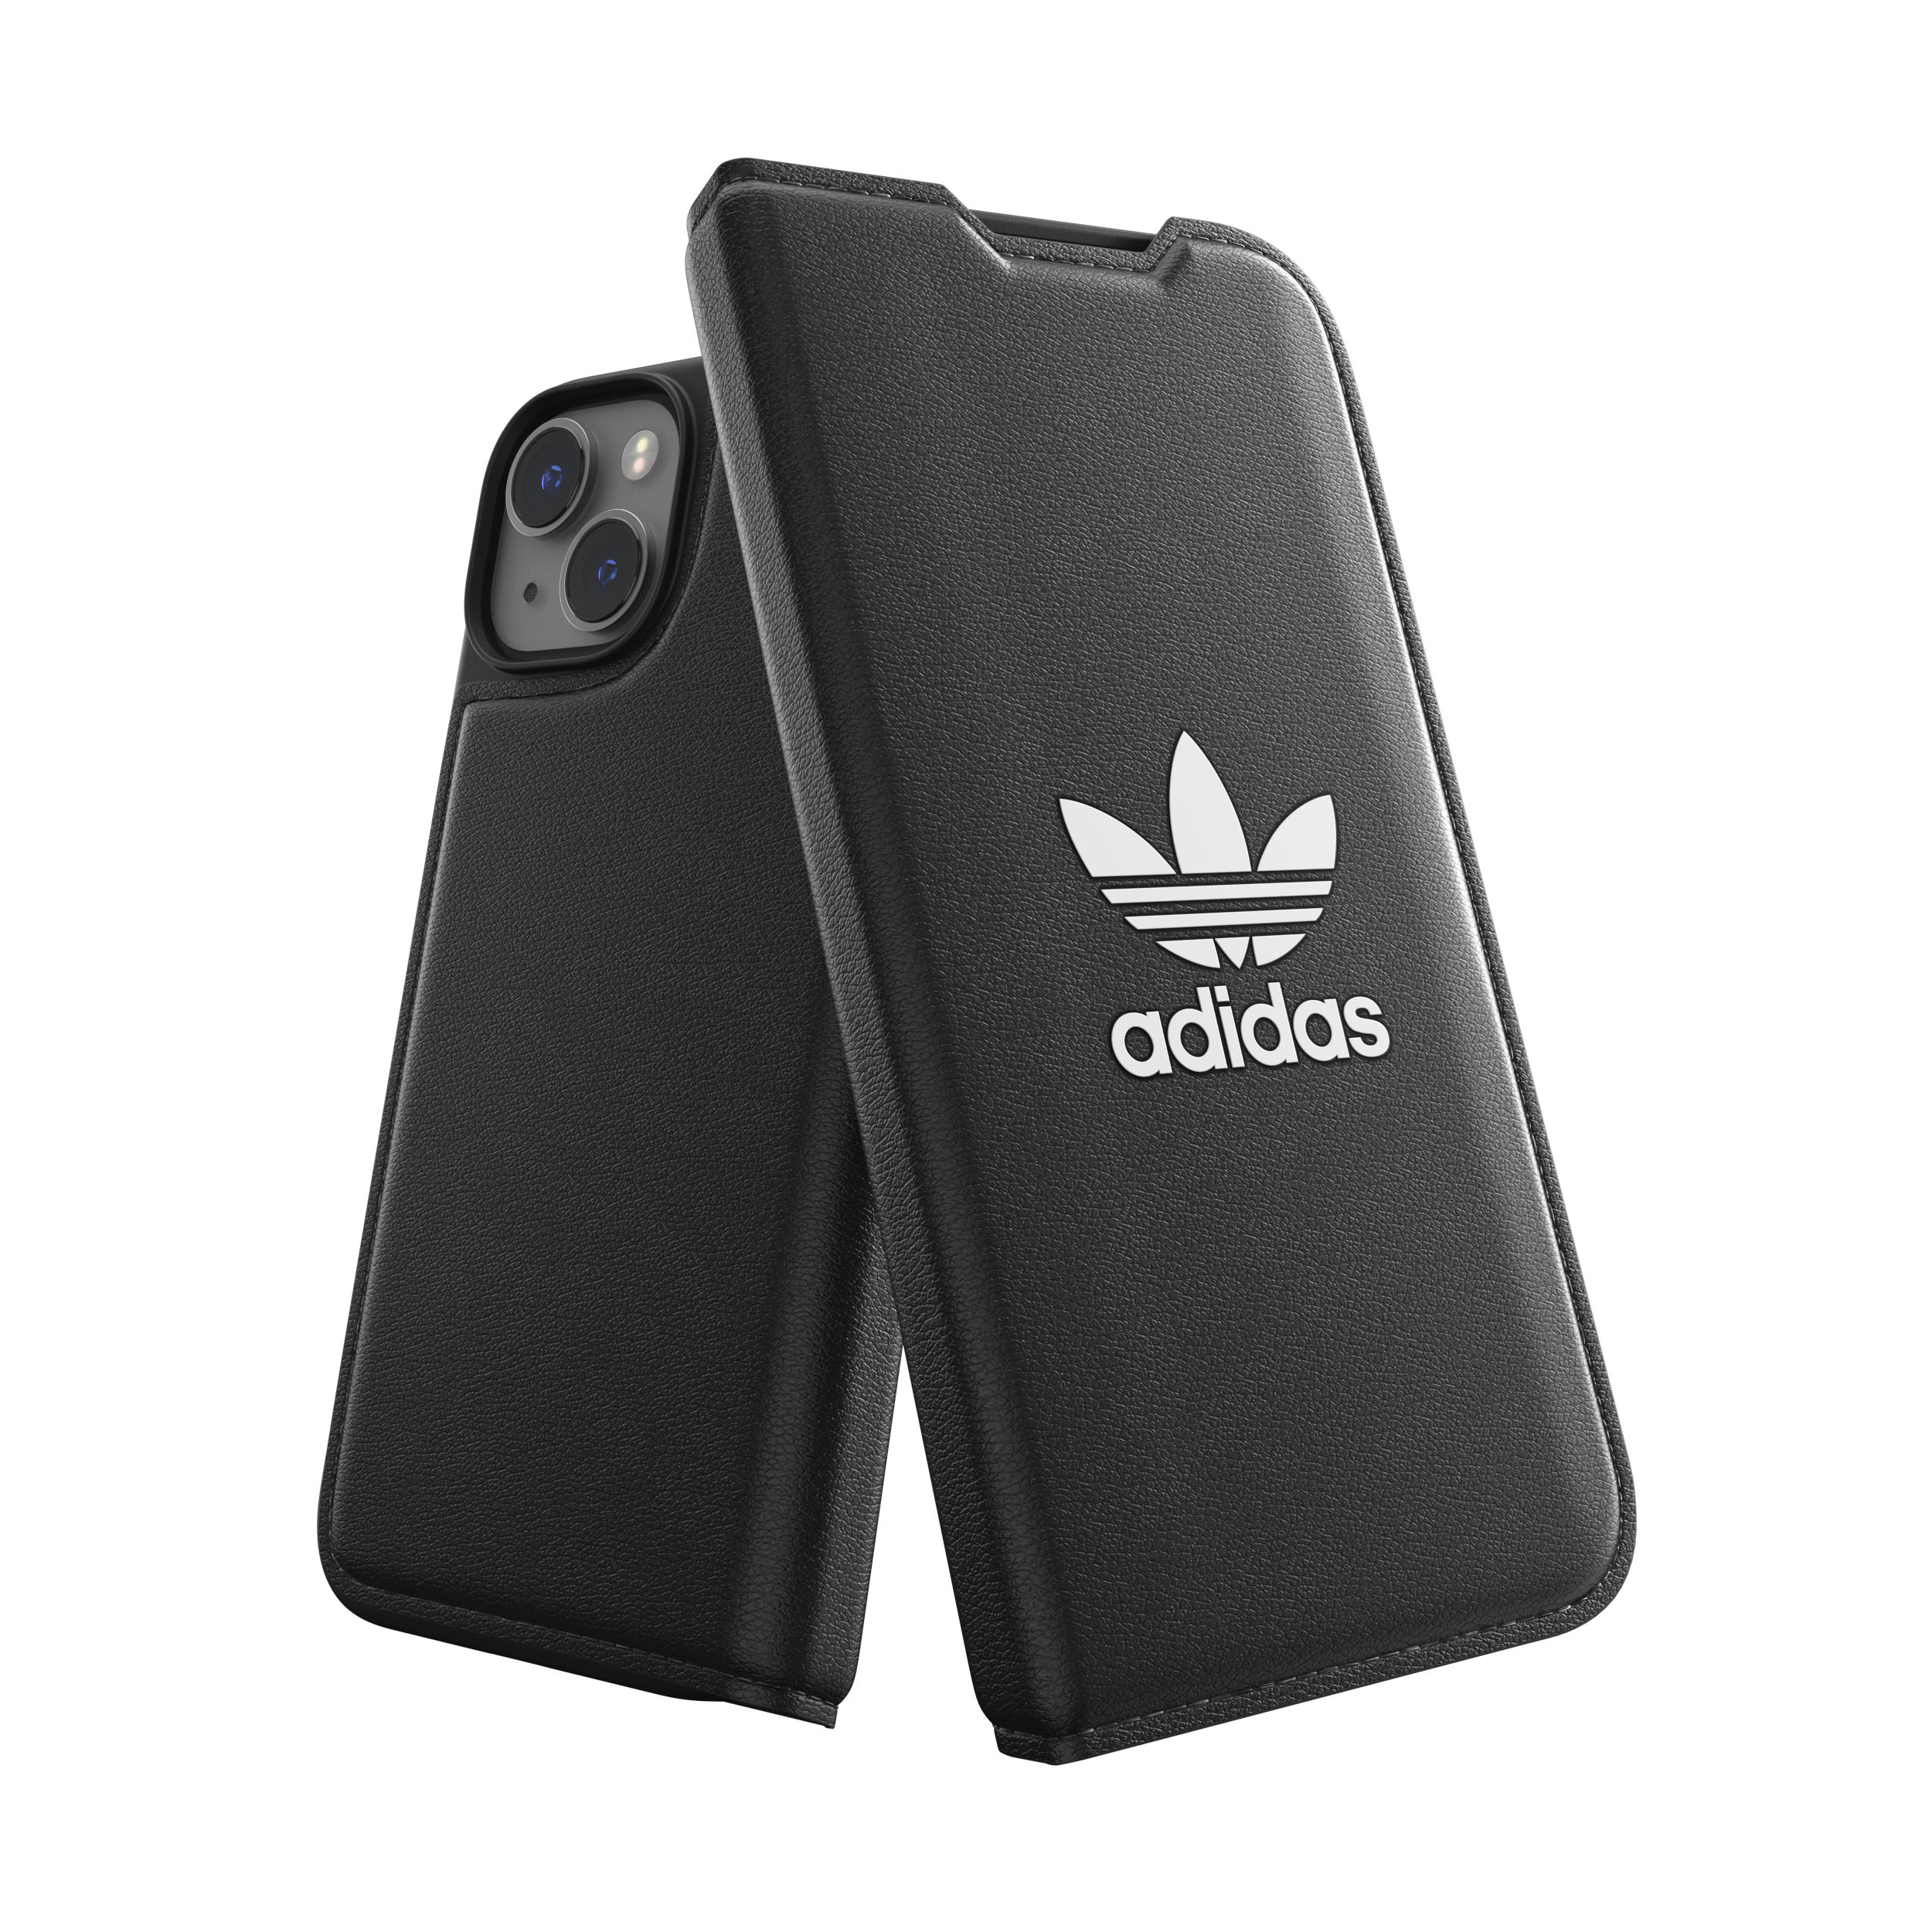 Booklet 14, Bookcover, Case BLACK BASIC, ADIDAS APPLE, IPHONE